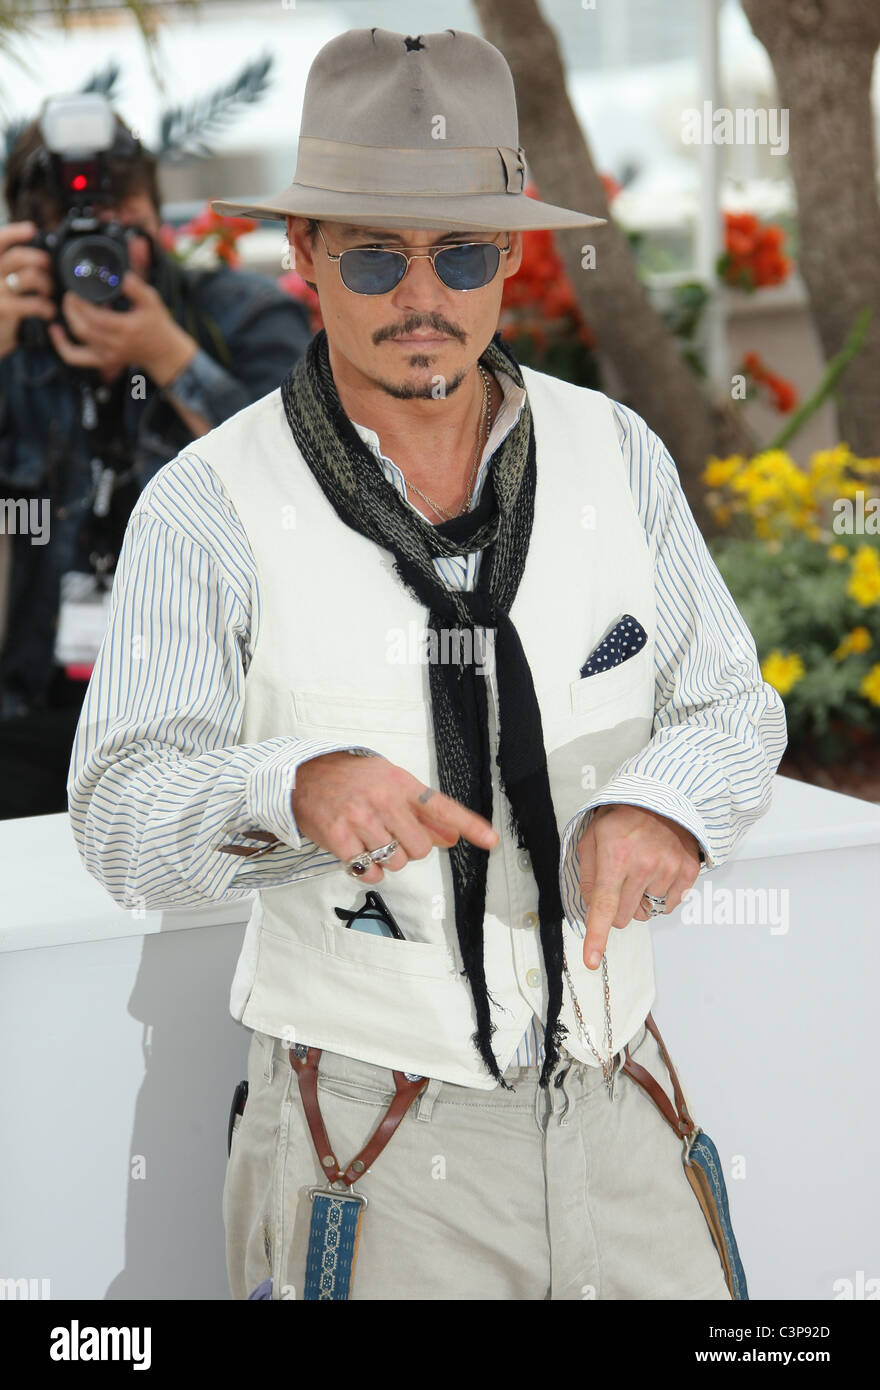 JOHNNY DEPP PIRATES OF THE CARIBBEAN: ON STRANGER TIDES PHOTOCALL CANNES FILM FESTIVAL 2011 PALAIS DES FESTIVAL CANNES FRANCE Stock Photo